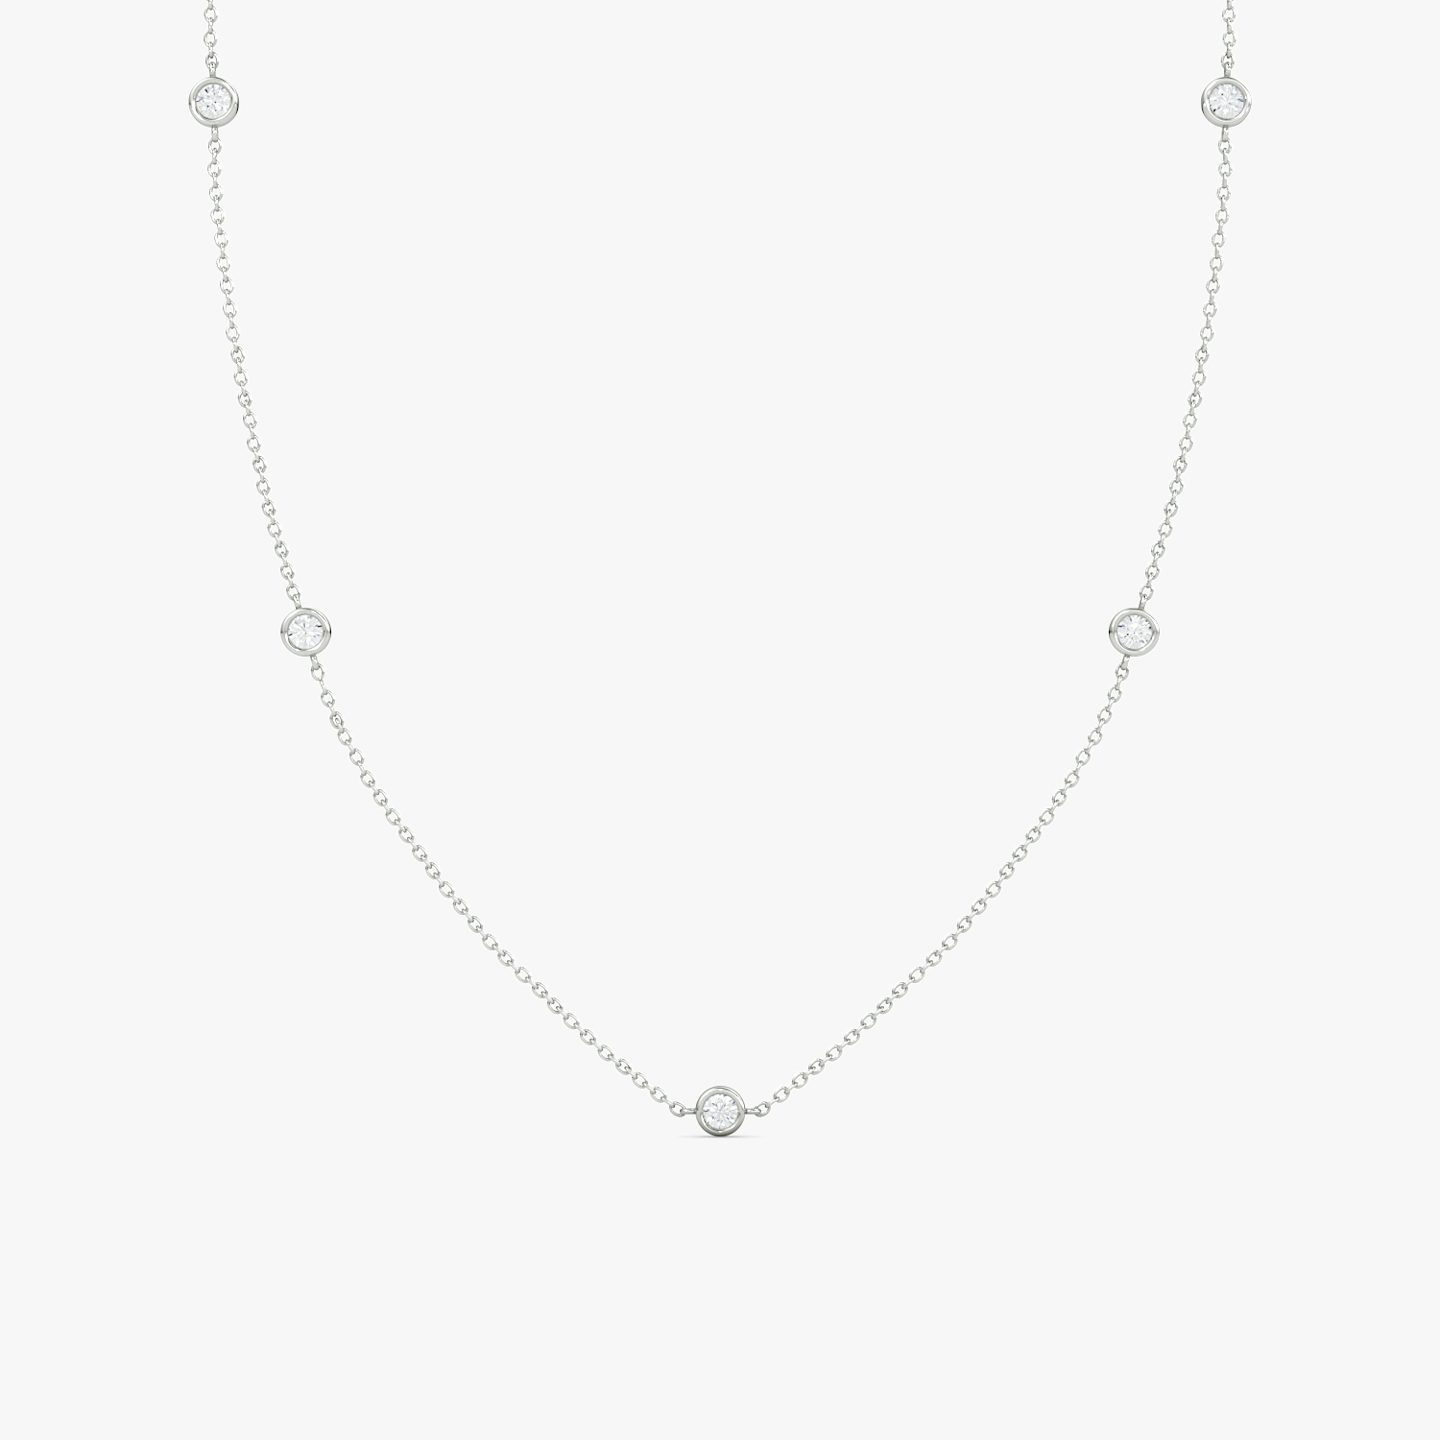 Silver Bezel Station Necklace | Round Brilliant | Sterling Silver | Diamond count: 5 | Chain length: 16-18